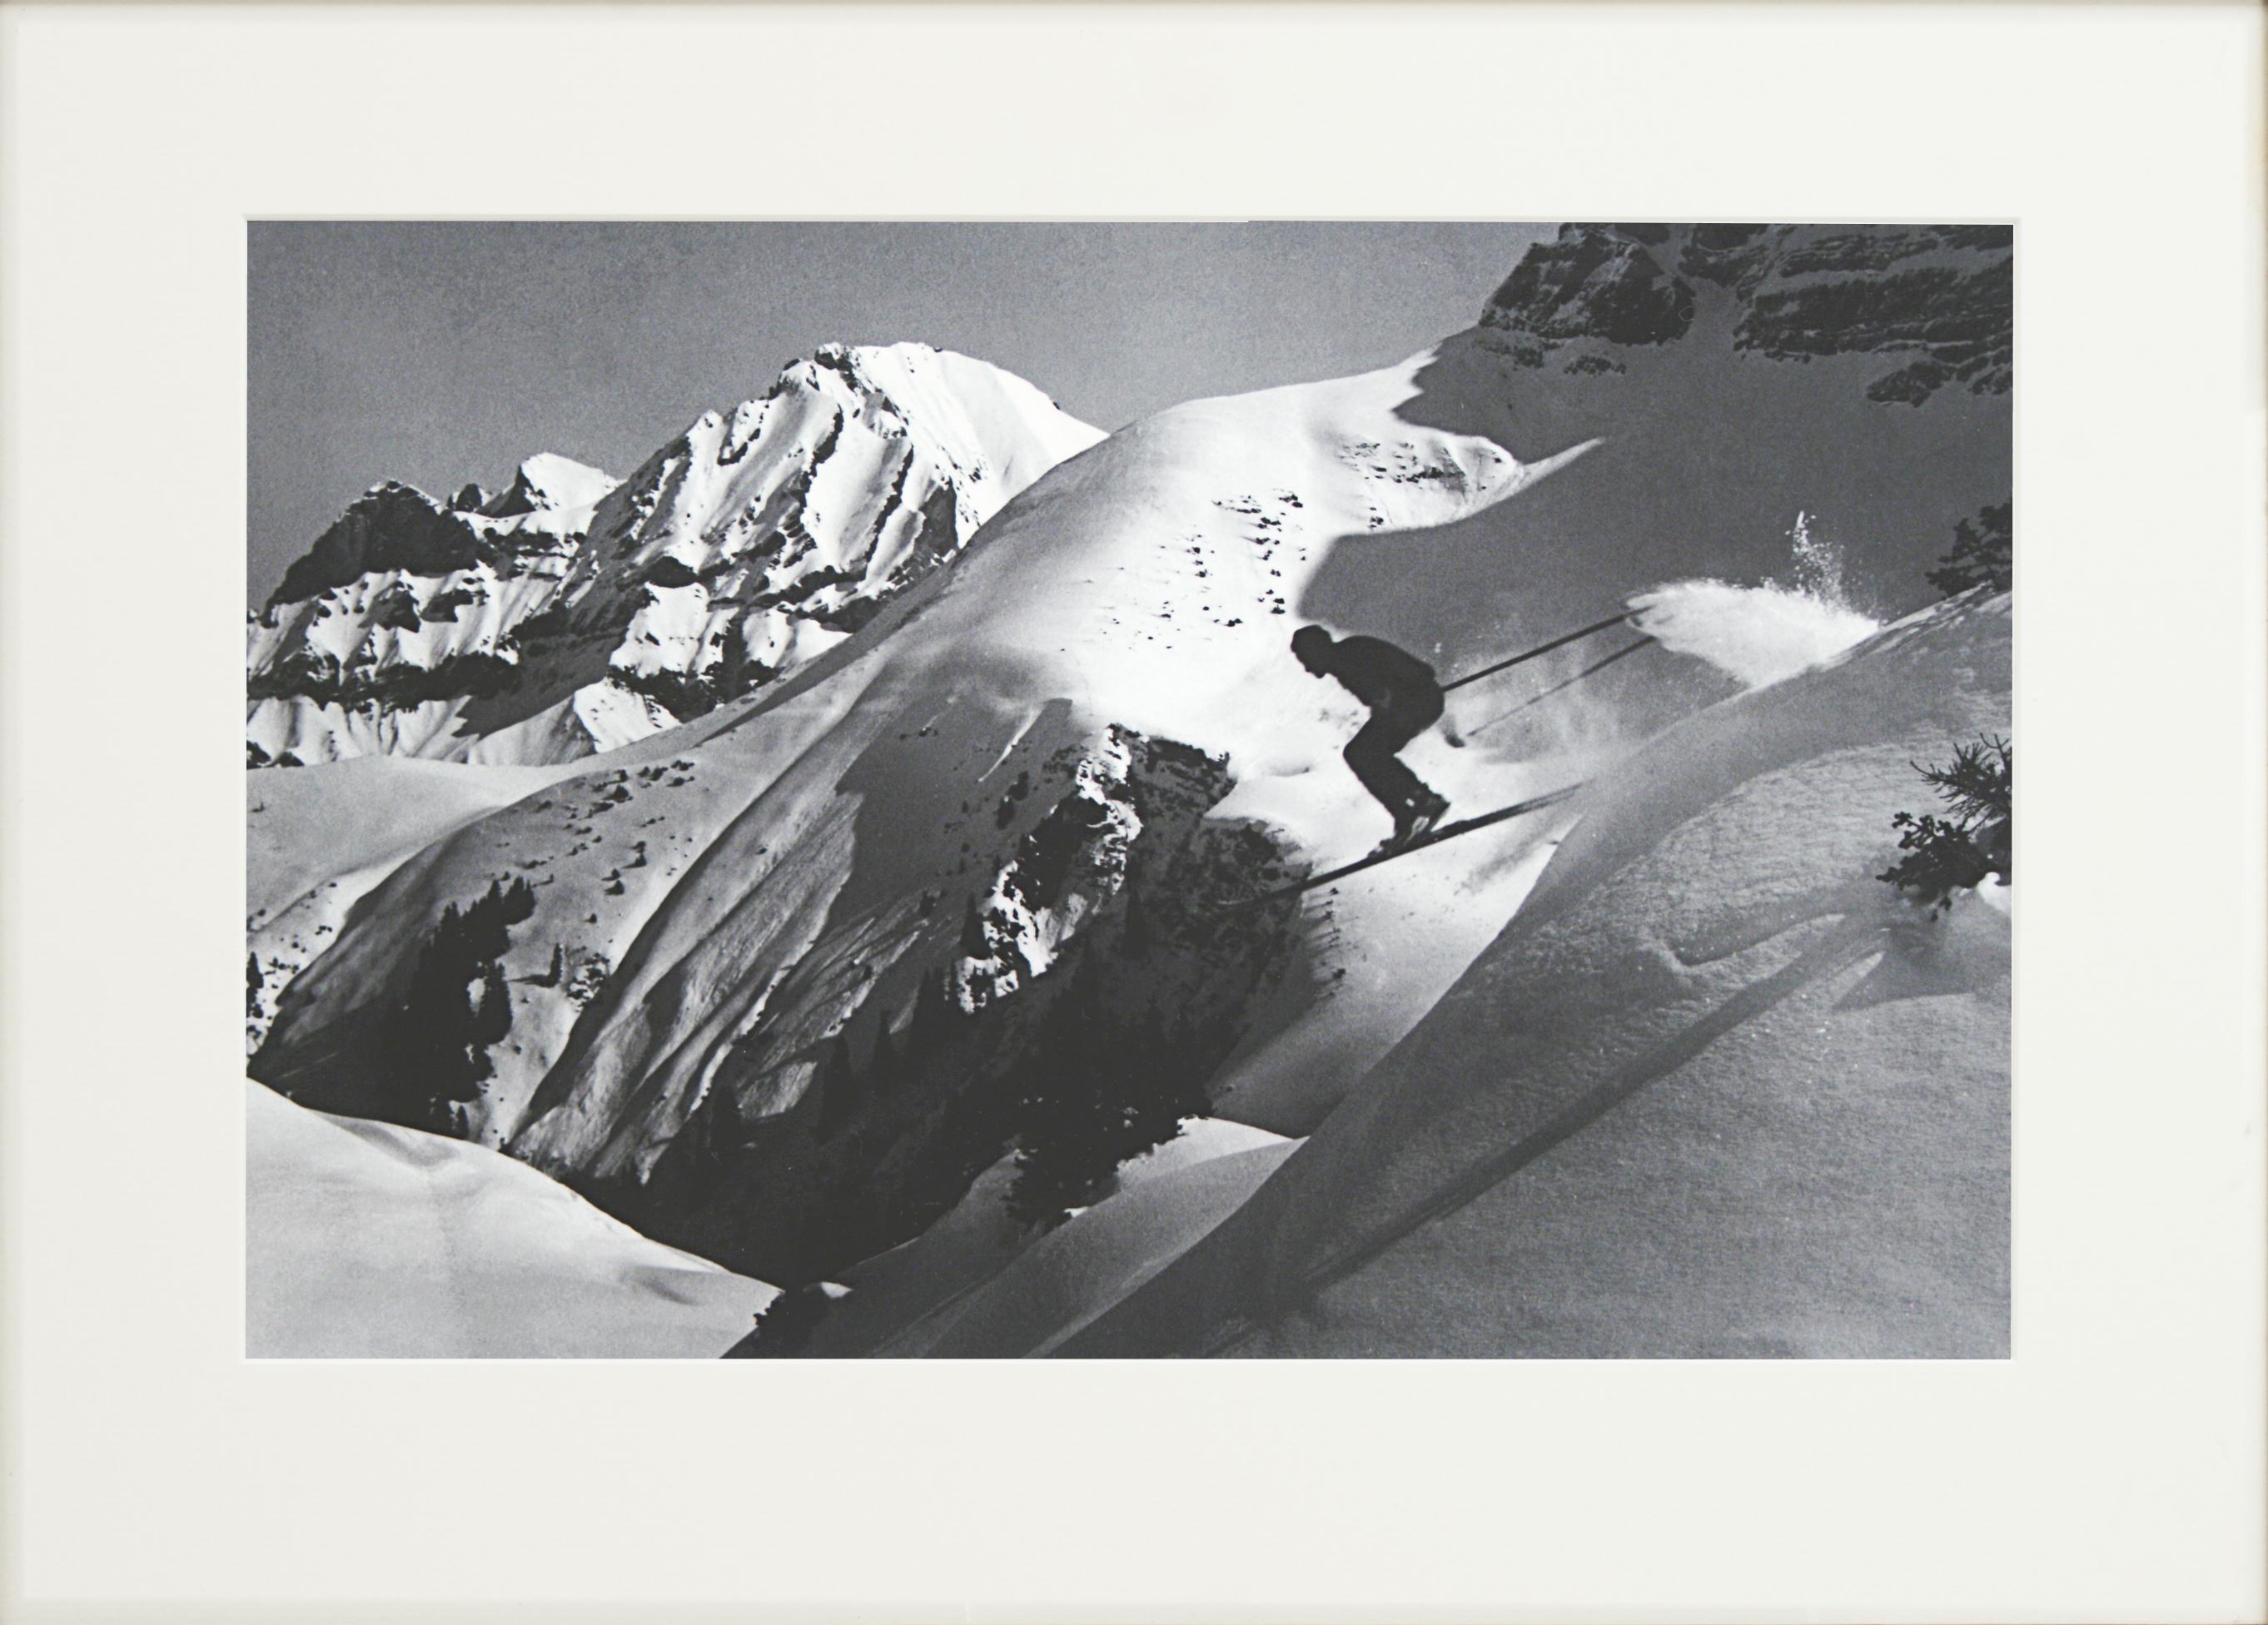 Sporting Art Alpine Ski Photograph, 'THE JUMP' Taken from 1930s Original For Sale